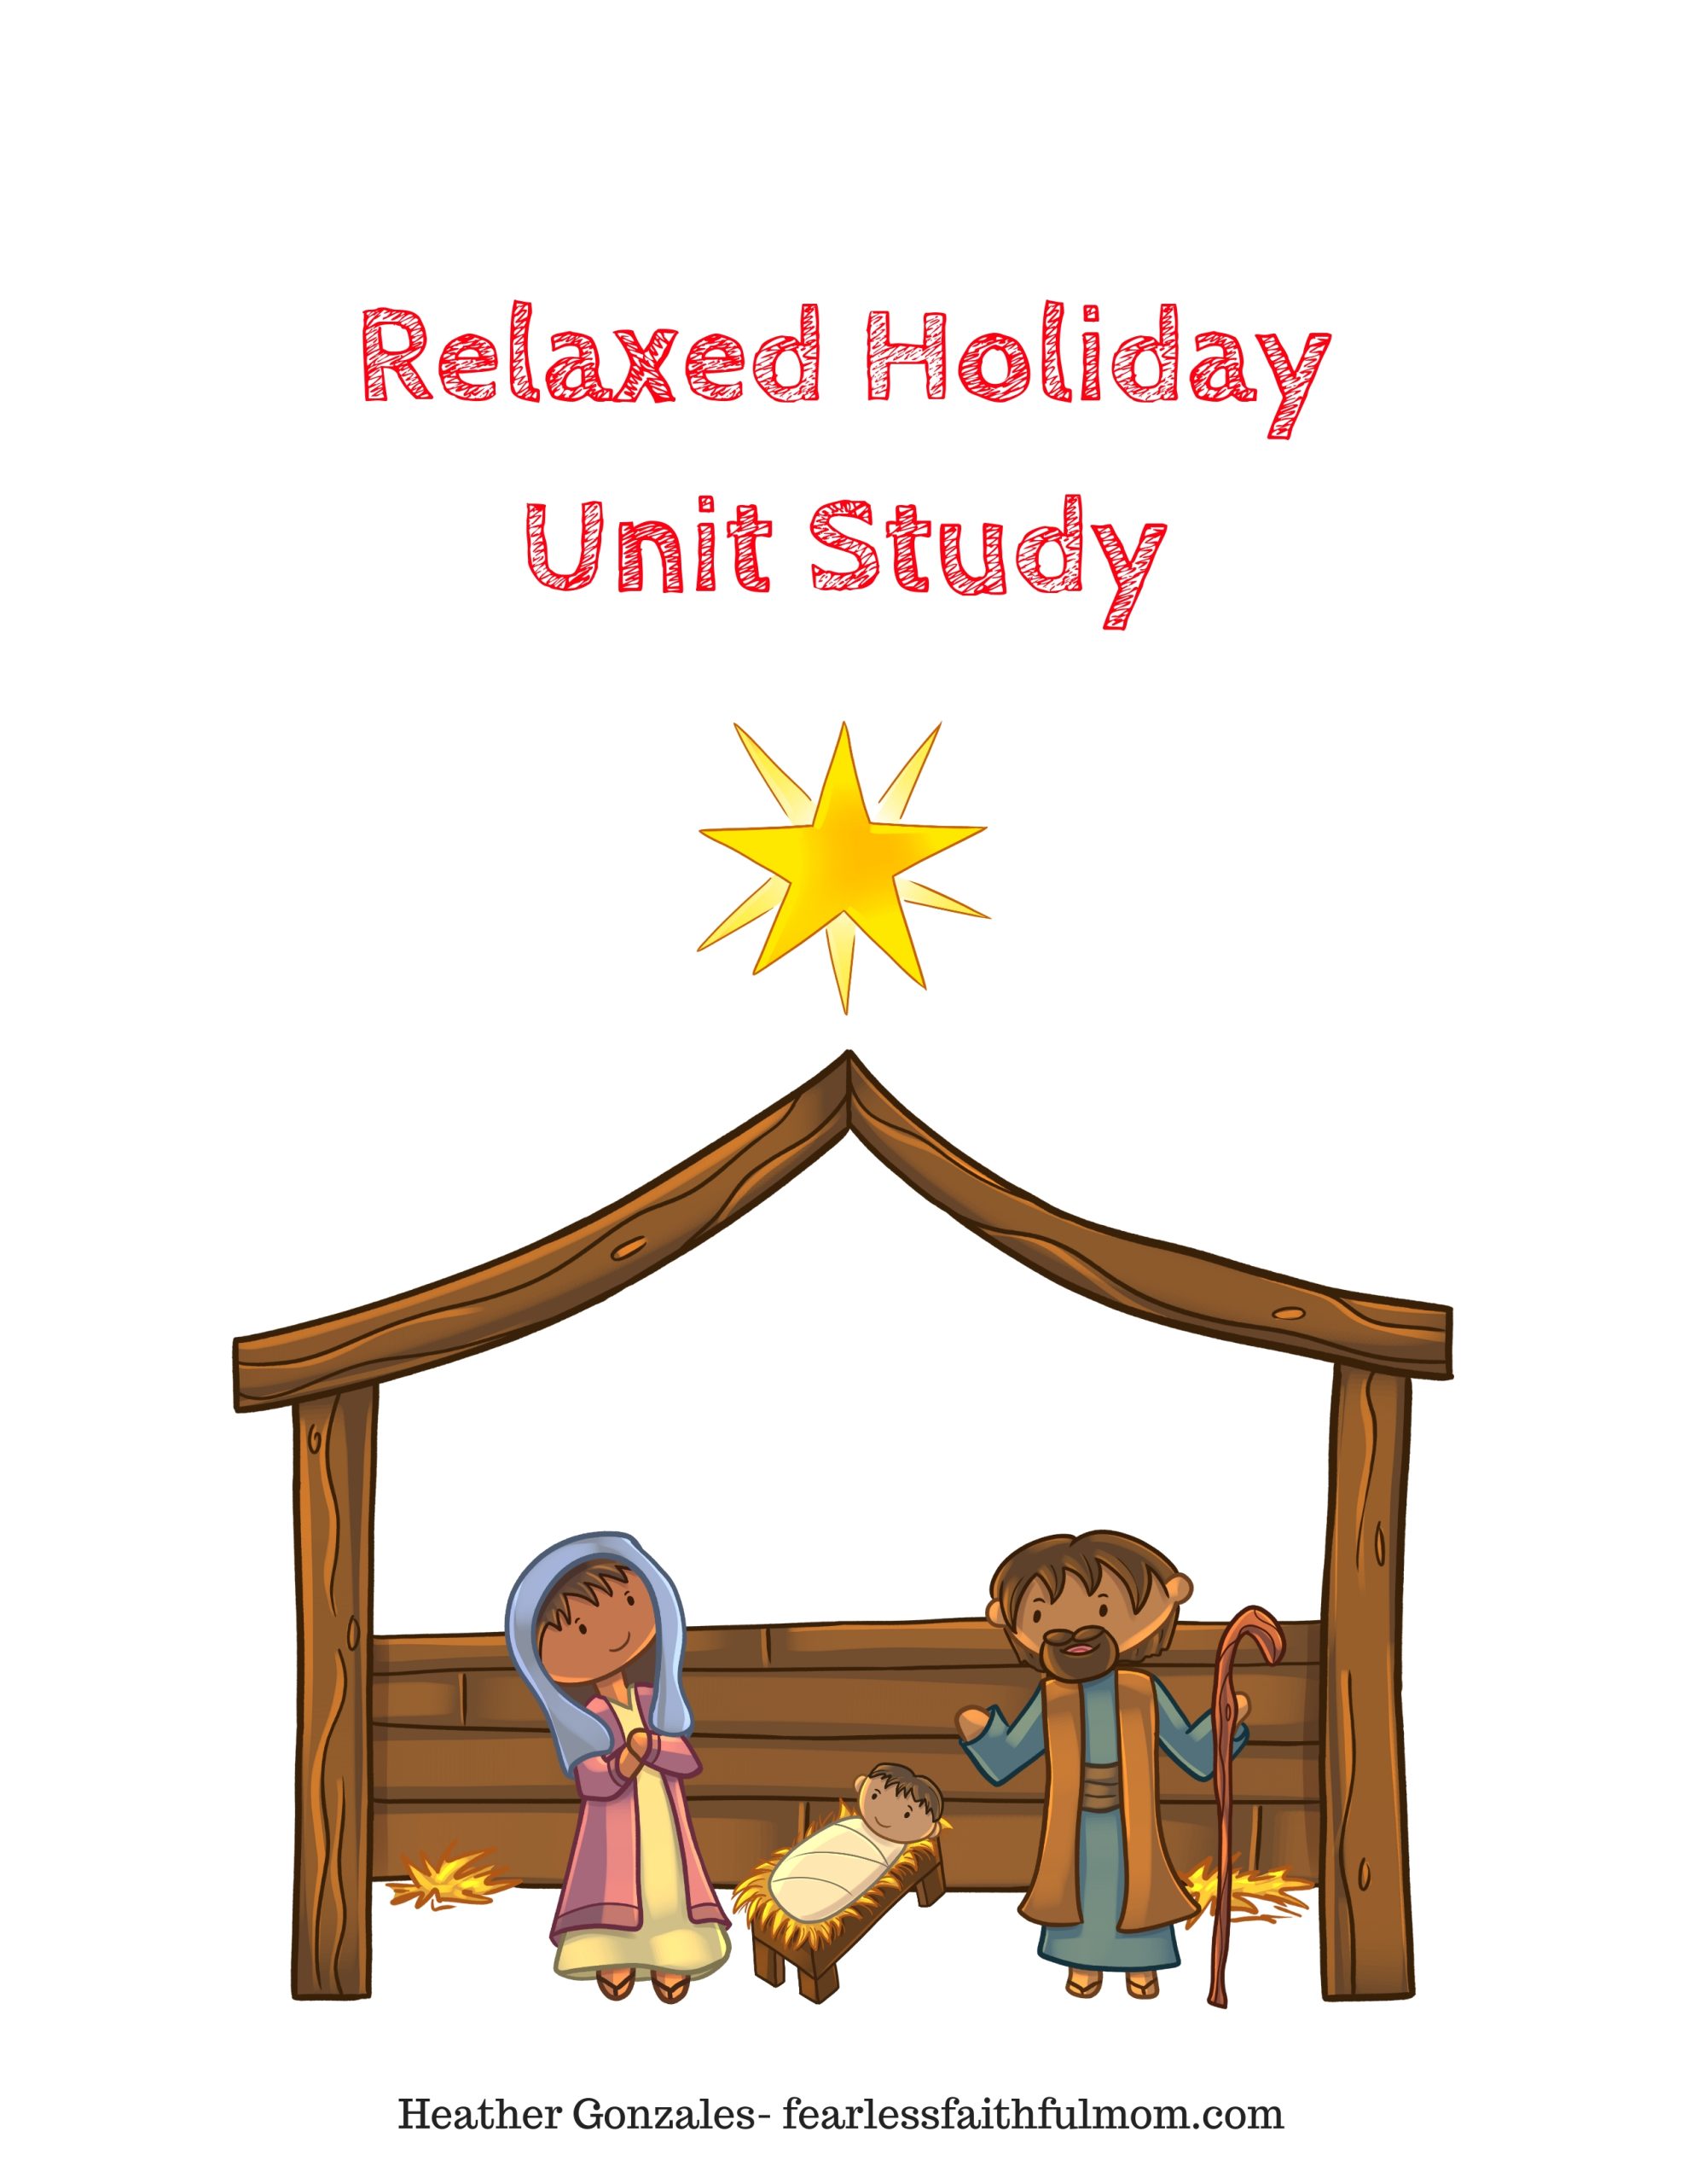 Use this Relaxed Holiday Unit Study to spend your holiday season focusing on the true meaning of the holidays in a laid back way! #holiday #unitstudy #homeschool